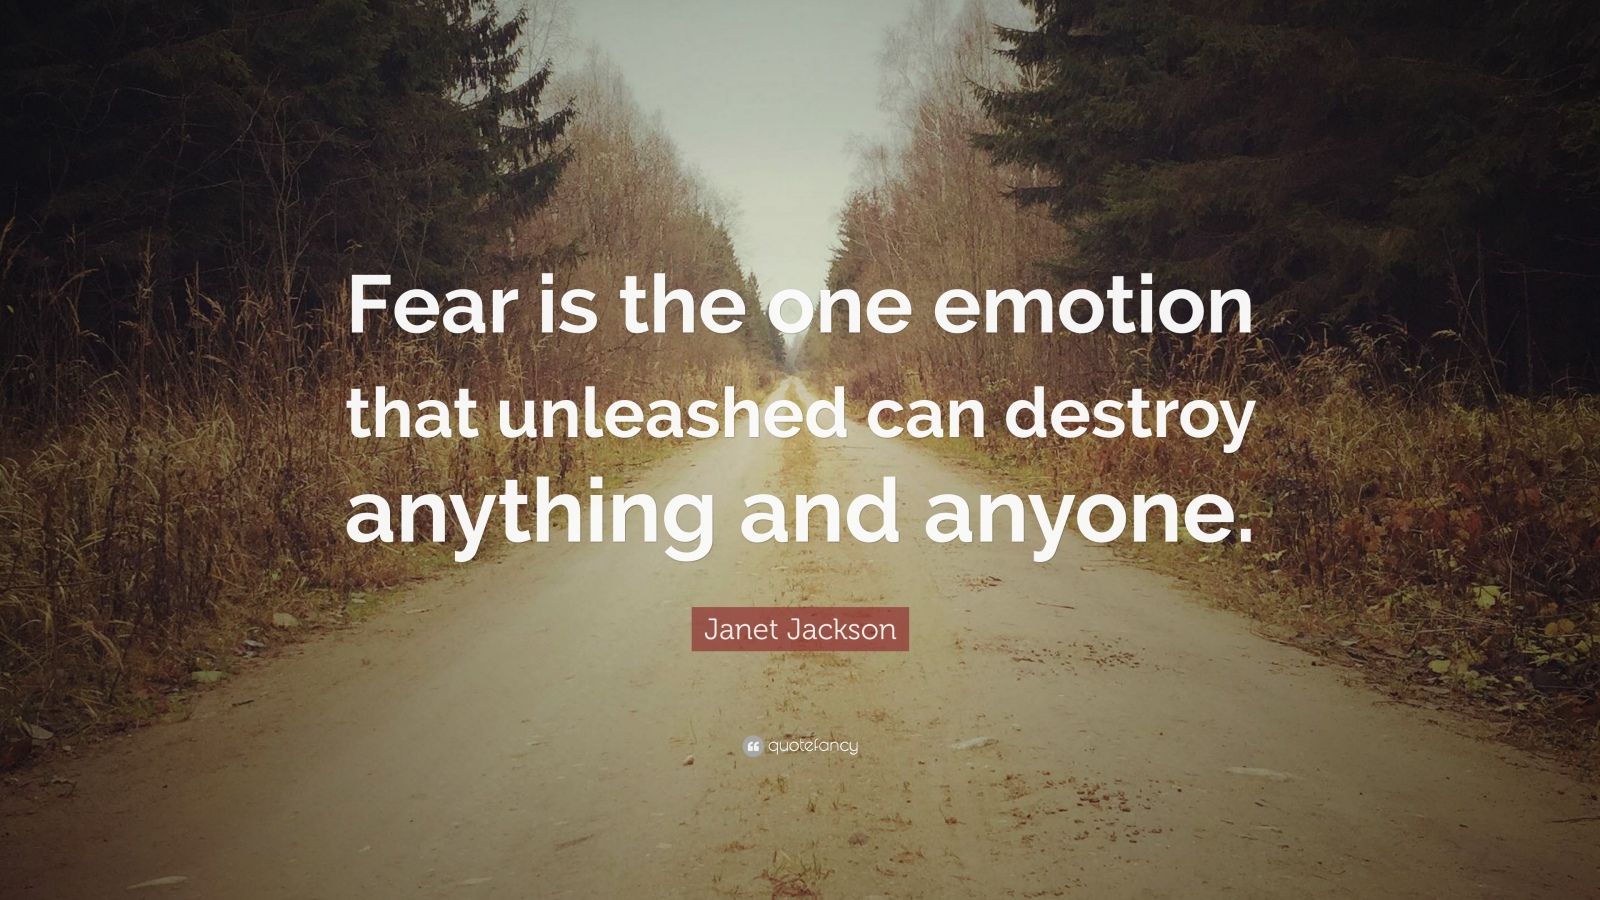 Janet Jackson Quote: “Fear is the one emotion that unleashed can ...